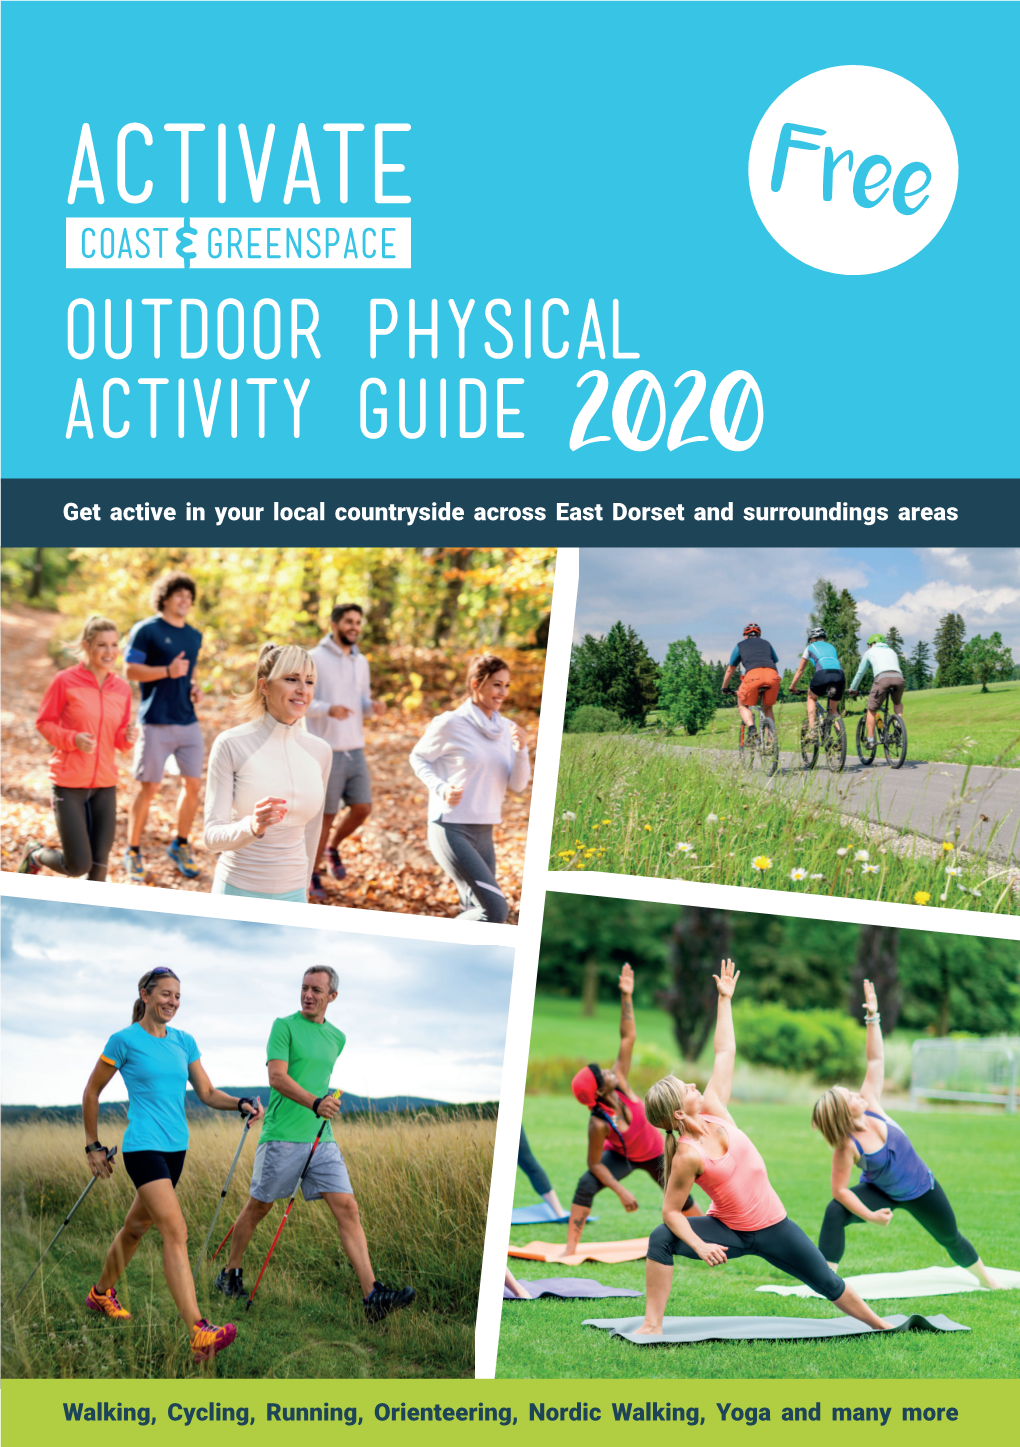 Outdoor Physical Activity Guide 2020 Get Active in Your Local Countryside Across East Dorset and Surroundings Areas